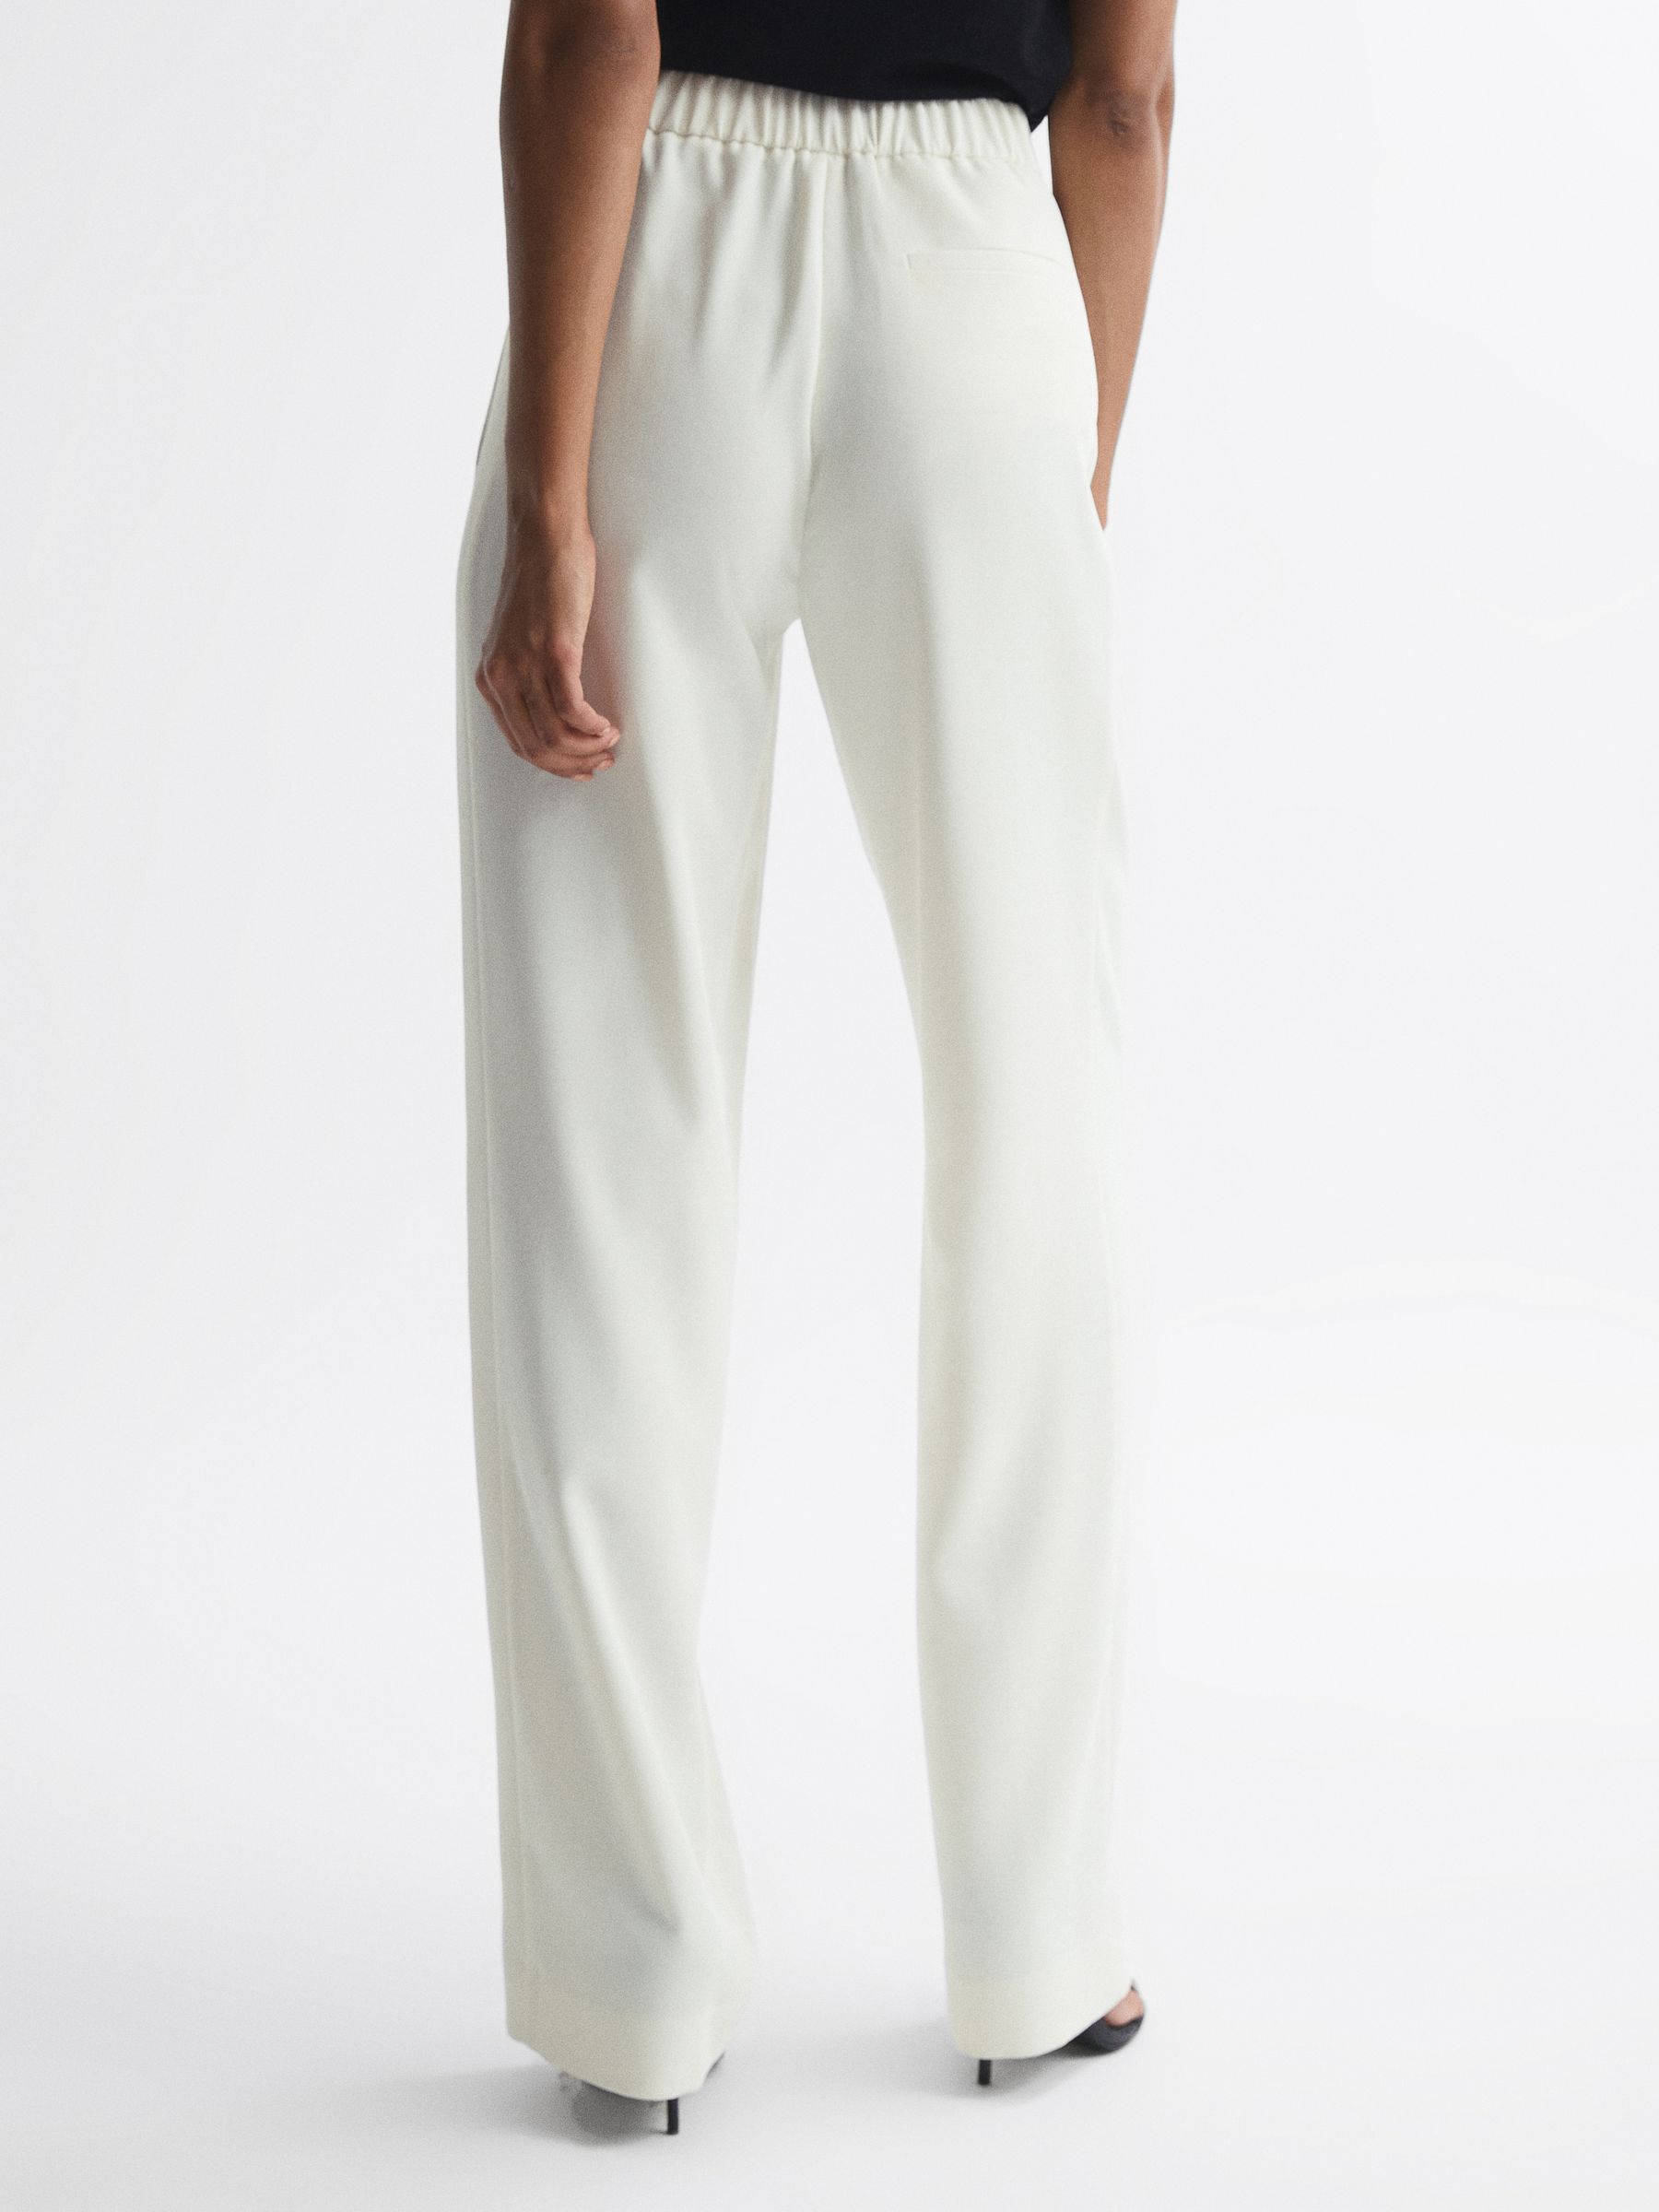 Reiss Aleah Pull On Trousers | REISS USA